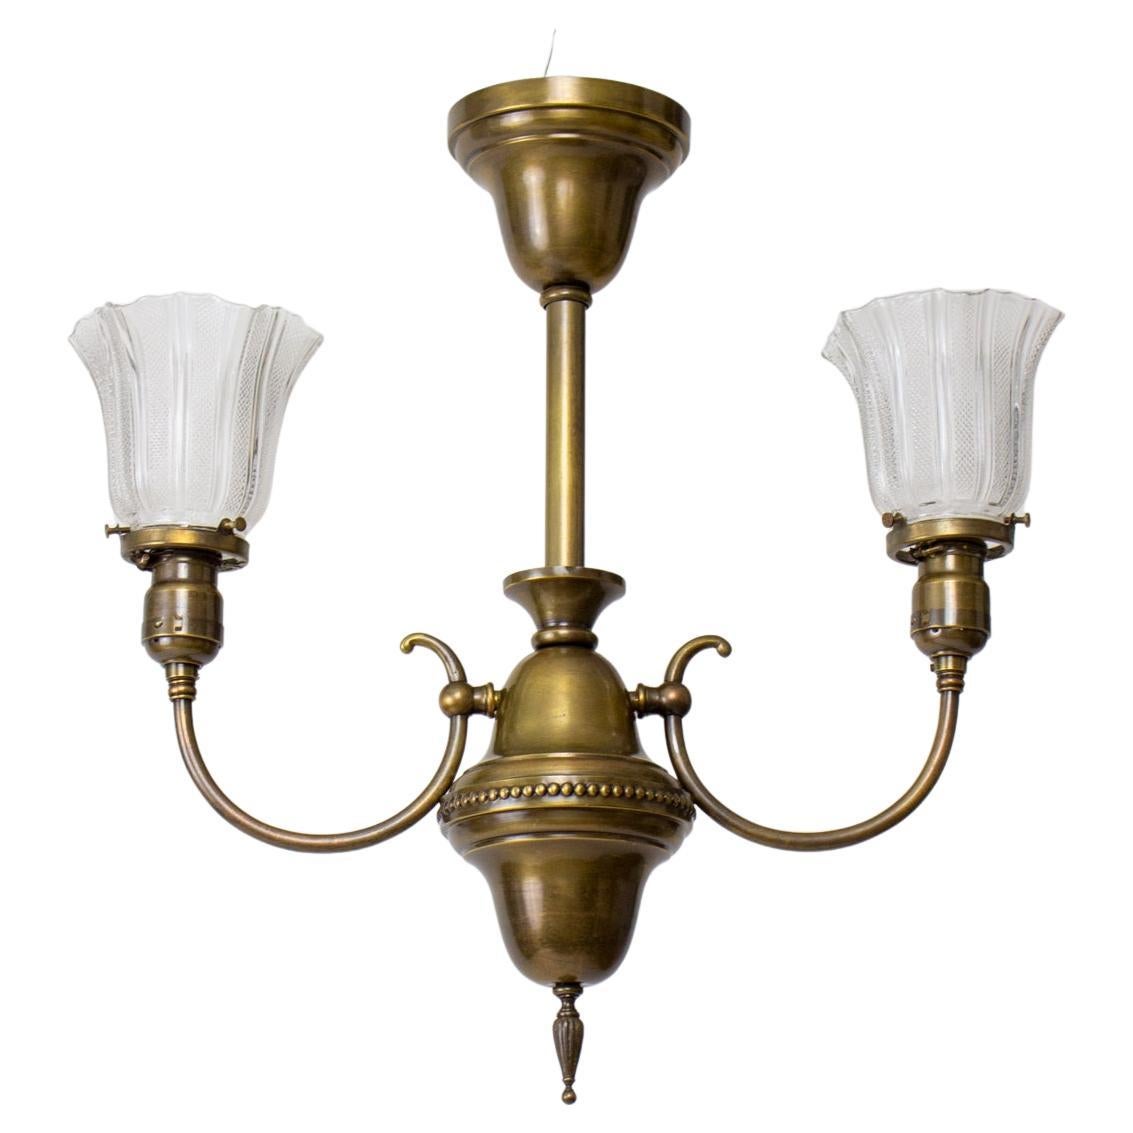 Brass Early Electric Fixture with Prismatic Glass